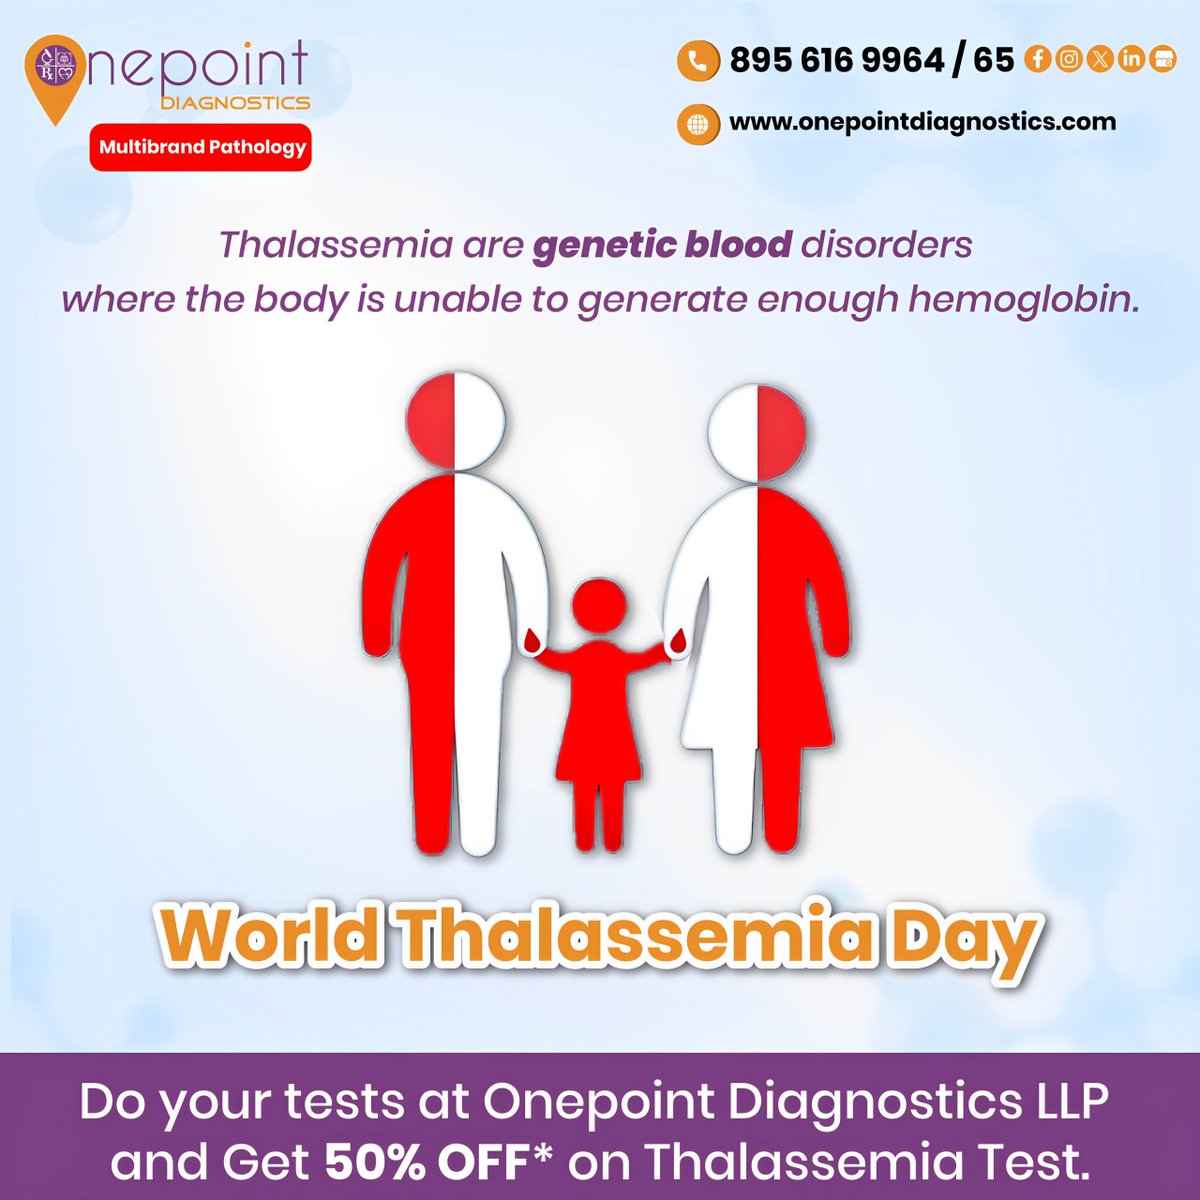 Let us Create Awareness About Thalassemia Among the General Public Around the World..!

𝐭𝐡𝐚𝐥𝐚𝐬𝐬𝐞𝐦𝐢𝐚 𝐝𝐚𝐲

#thalassemiaday #thalassemiaawareness #healthfacts #worldthalassemiaday #thalassemia #health #healthylife #regularcheckup #onepointdiagnostics